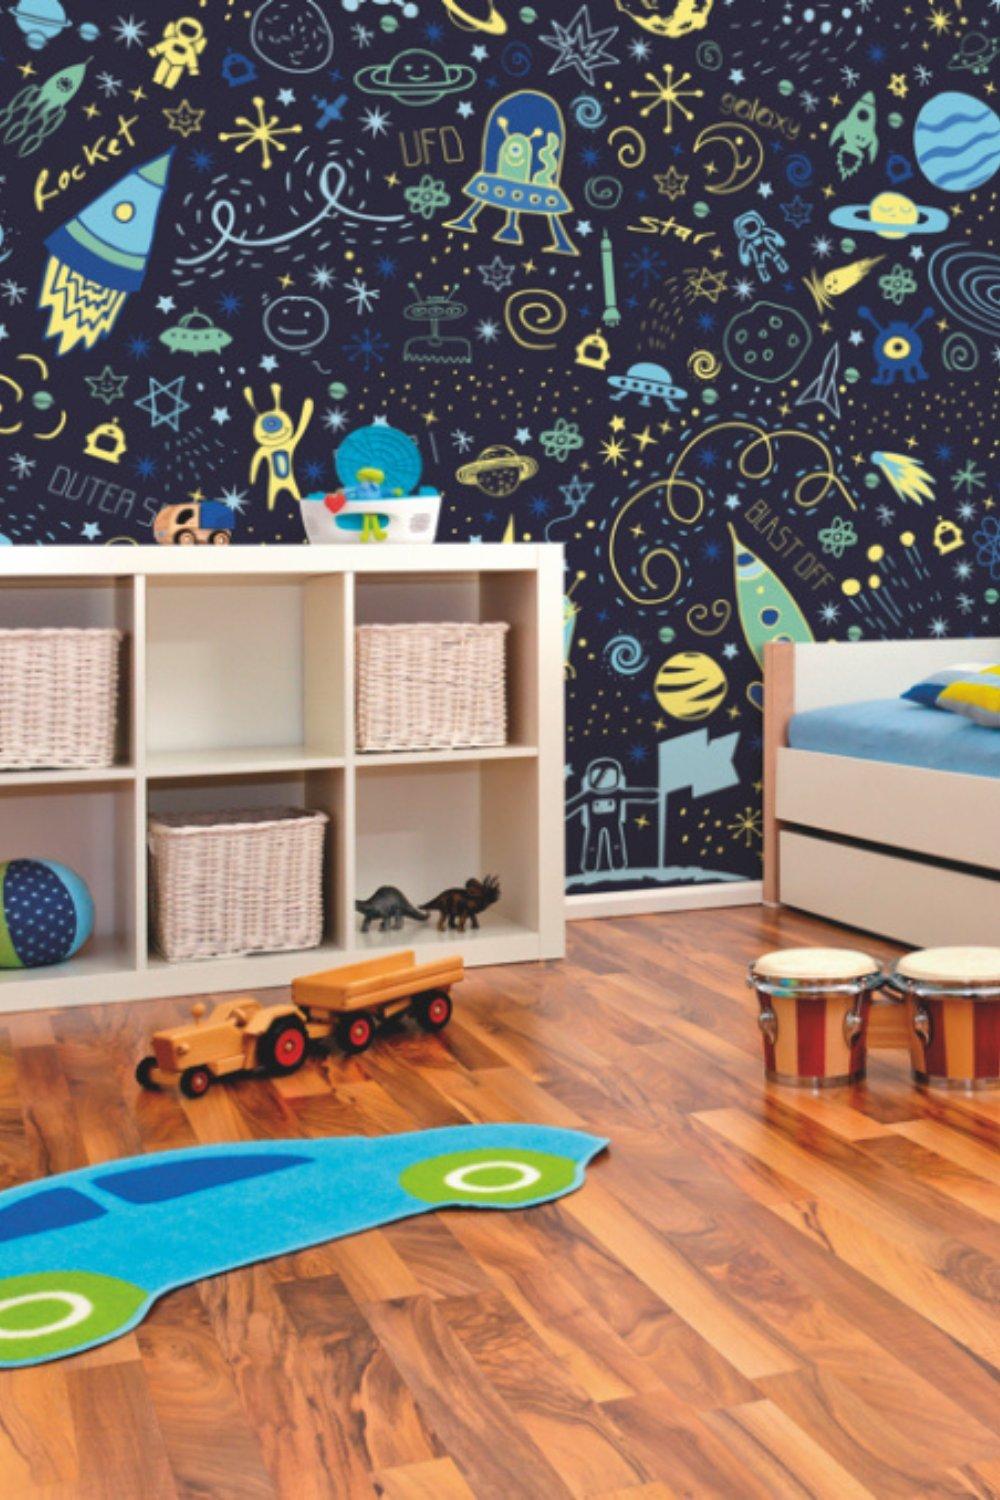 Space Doodle Text Navy Blue Matt Smooth Paste the Wall Mural 300cm wide x 240cm high